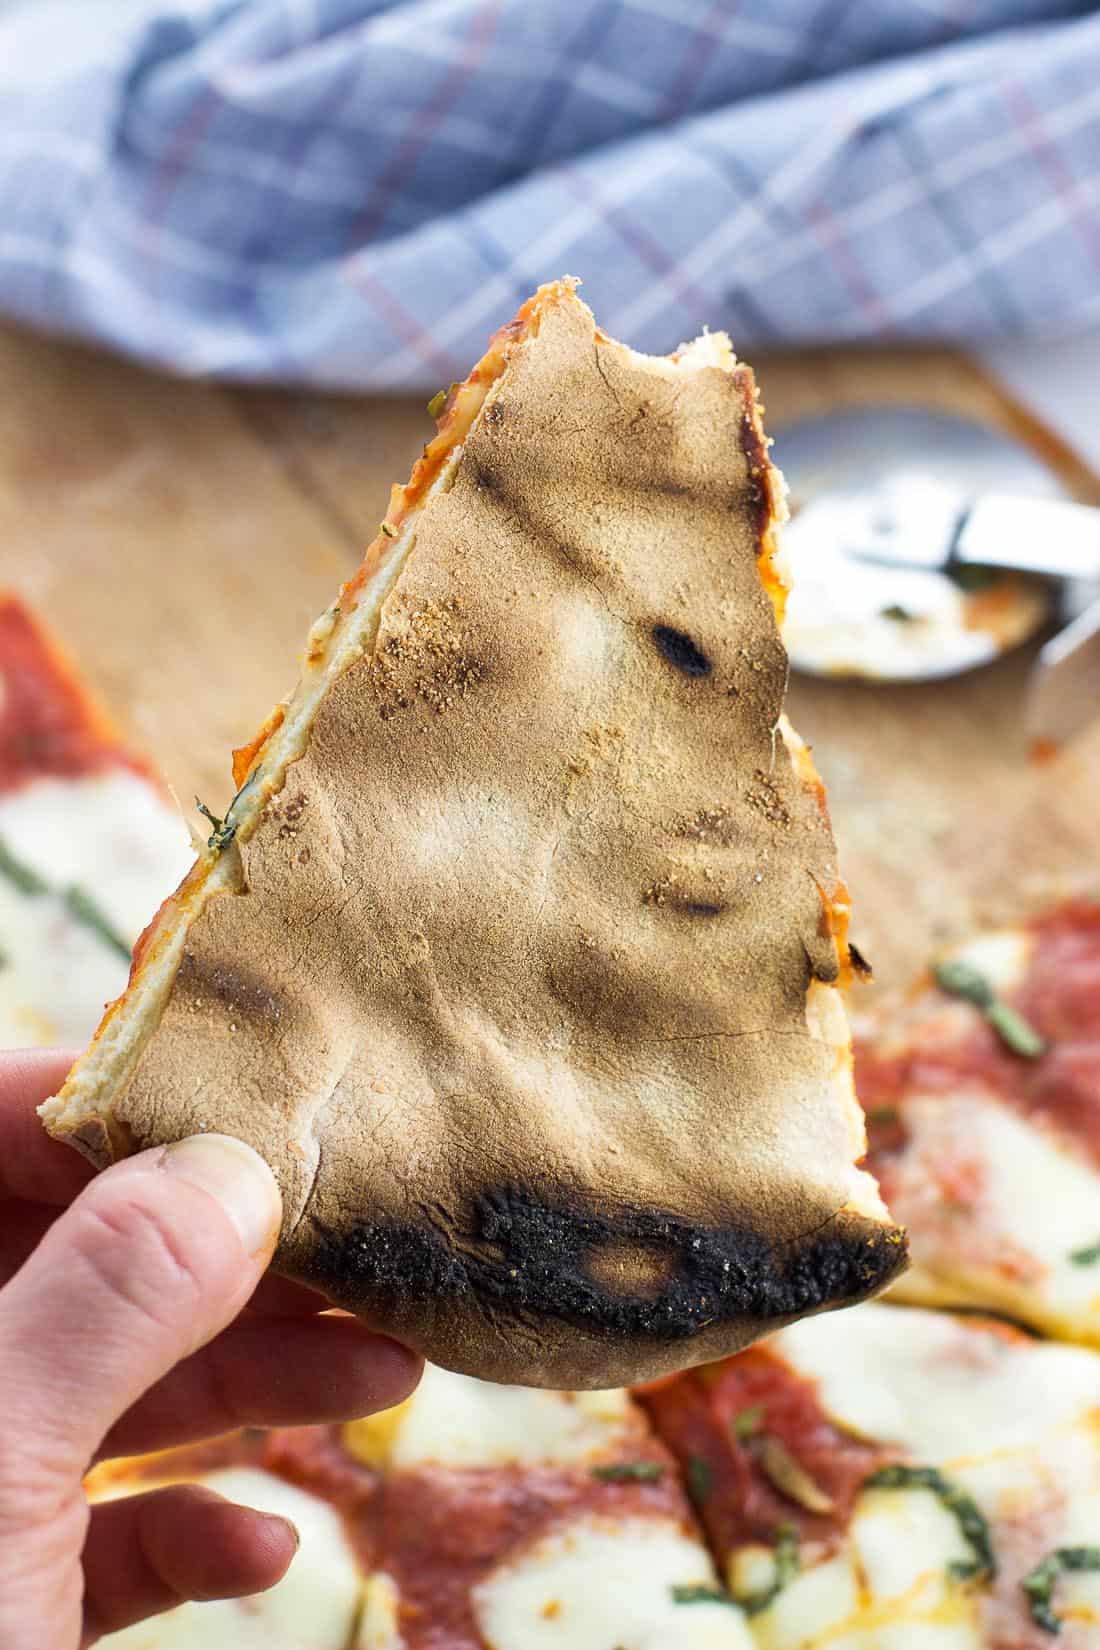 The bottom of a slice of pizza being held up to show the crispy bits